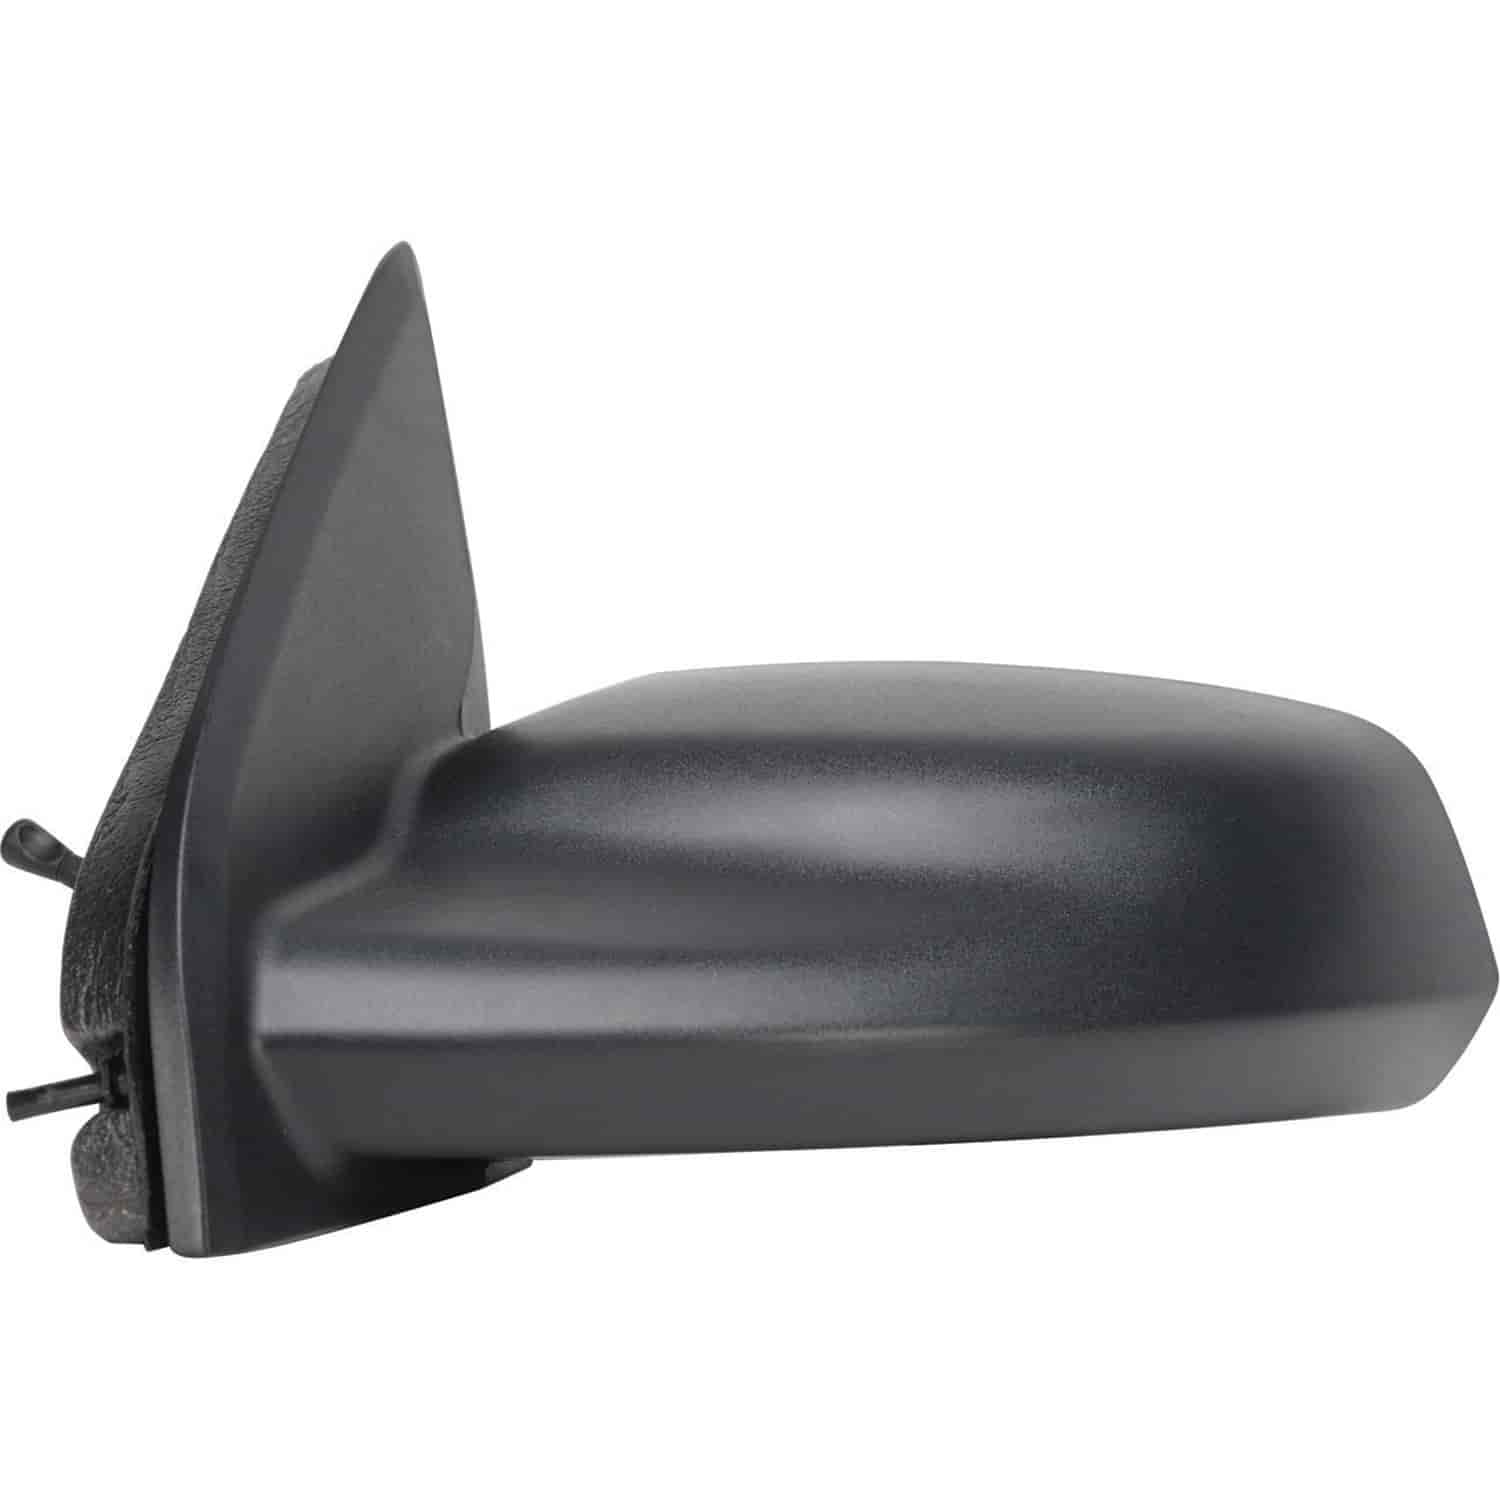 OEM Style Replacement mirror for 03-07 Saturn Ion